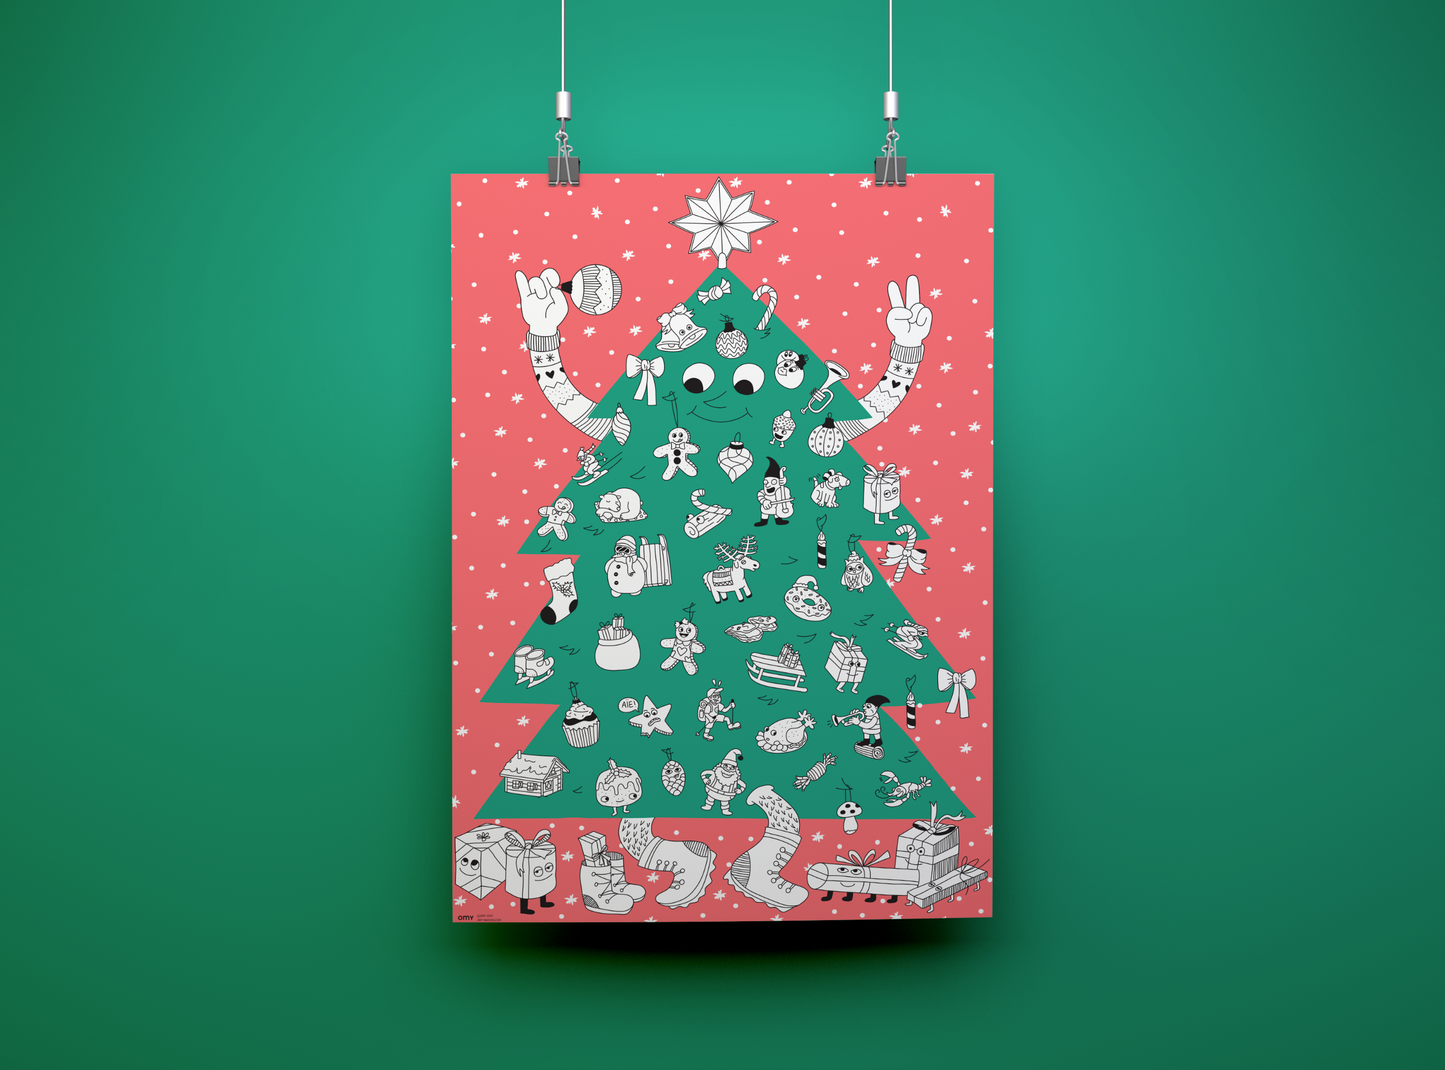 Christmas Tree - Póster gigante con stickers